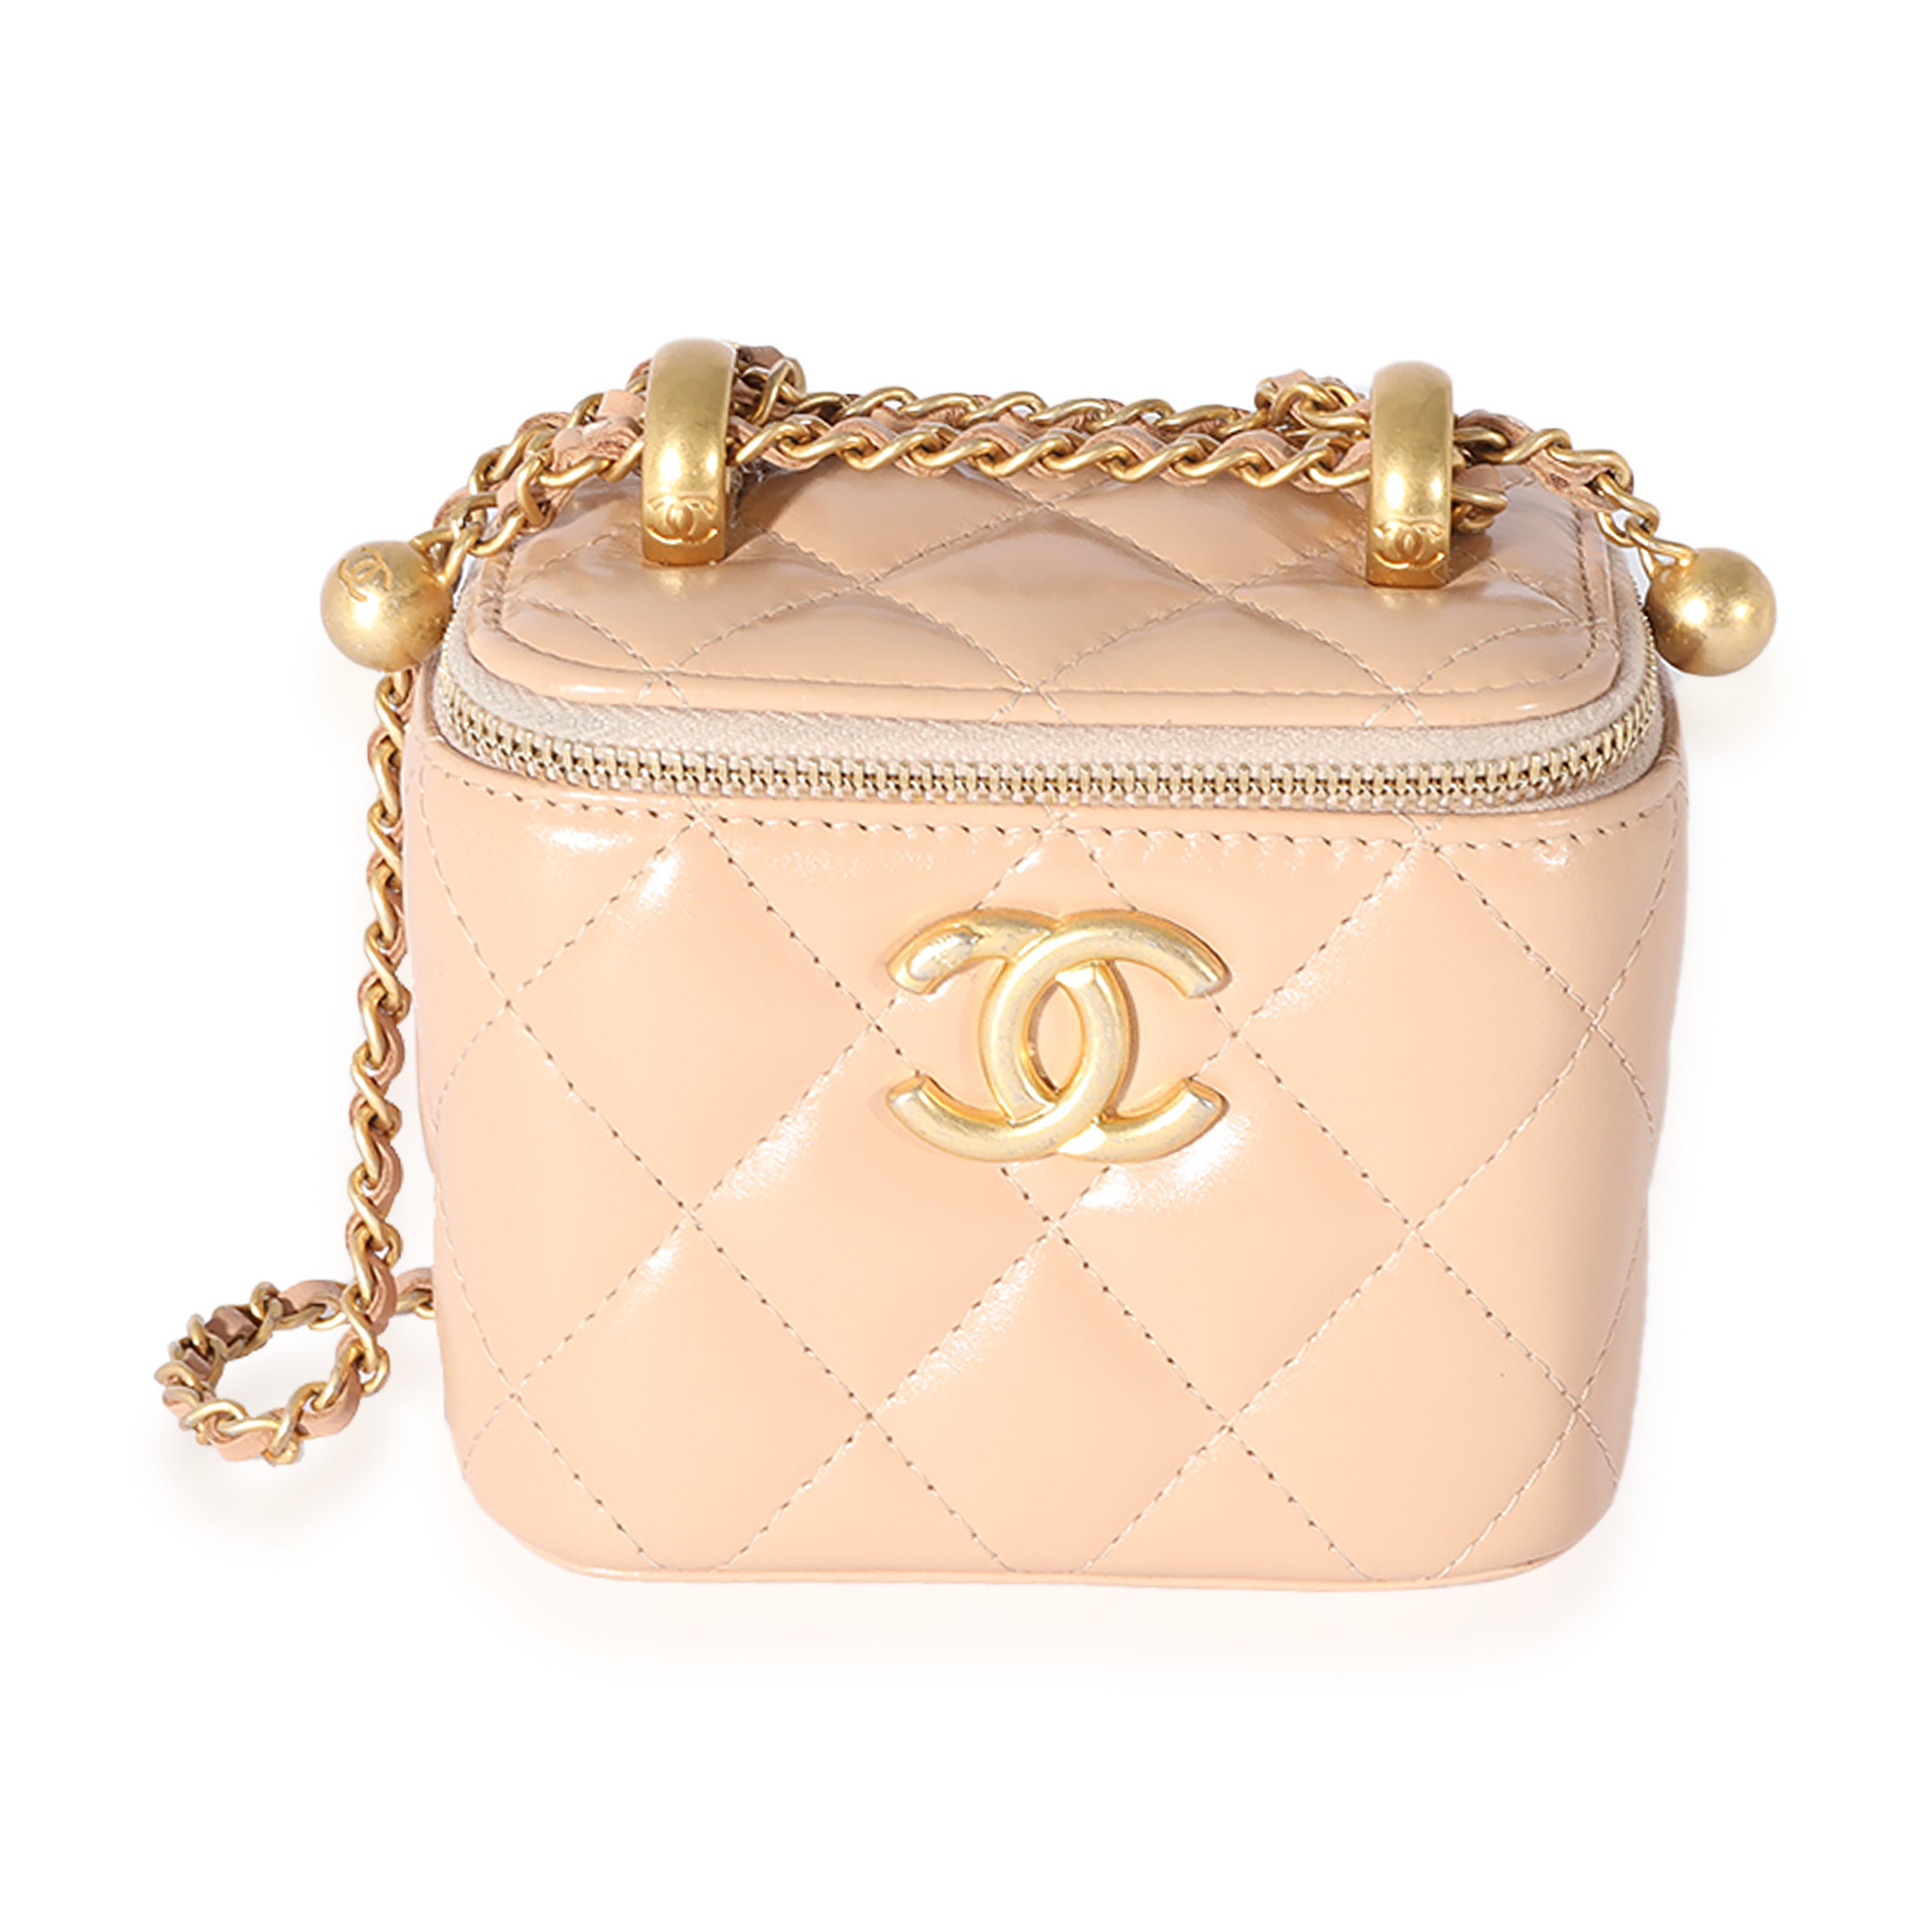 Chanel Monte Carlo Small Vanity Case Black Quilted Lambskin Gold Hardw –  Madison Avenue Couture